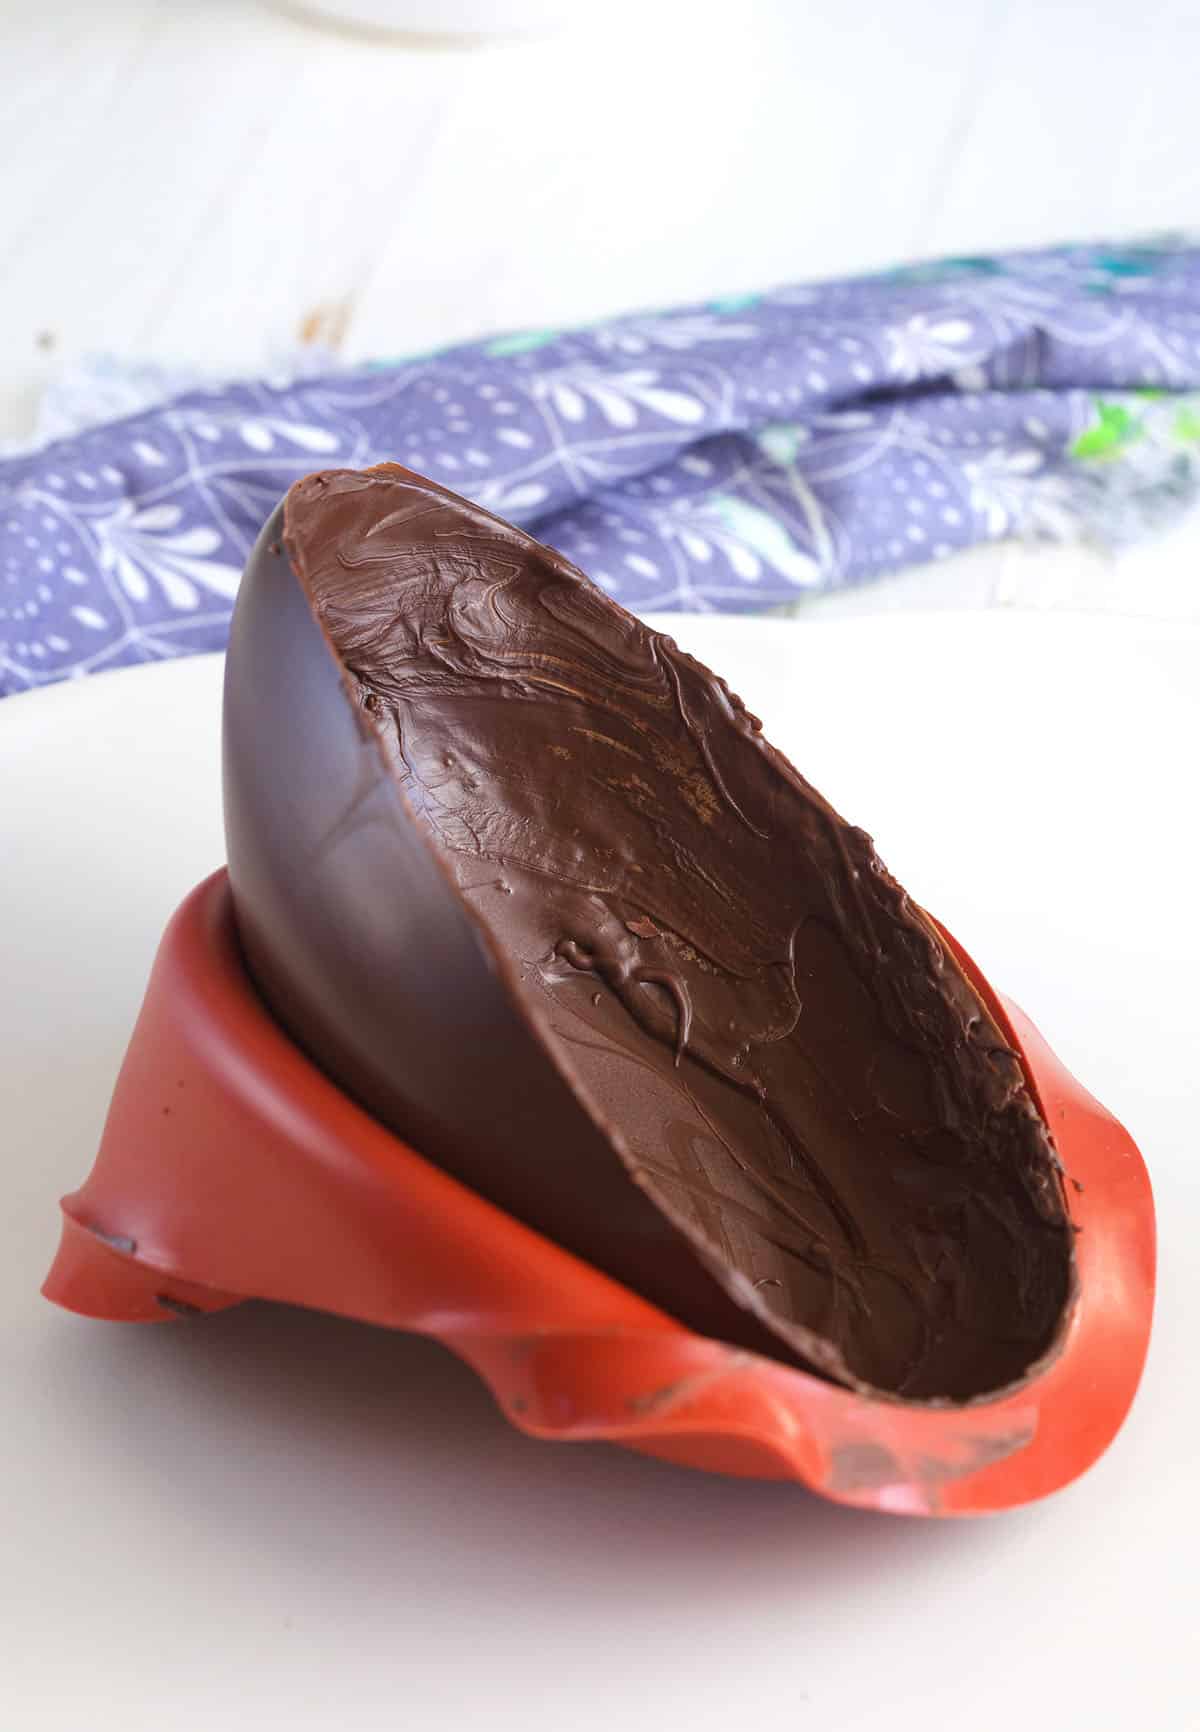 One half of a chocolate egg is placed on a countertop. 